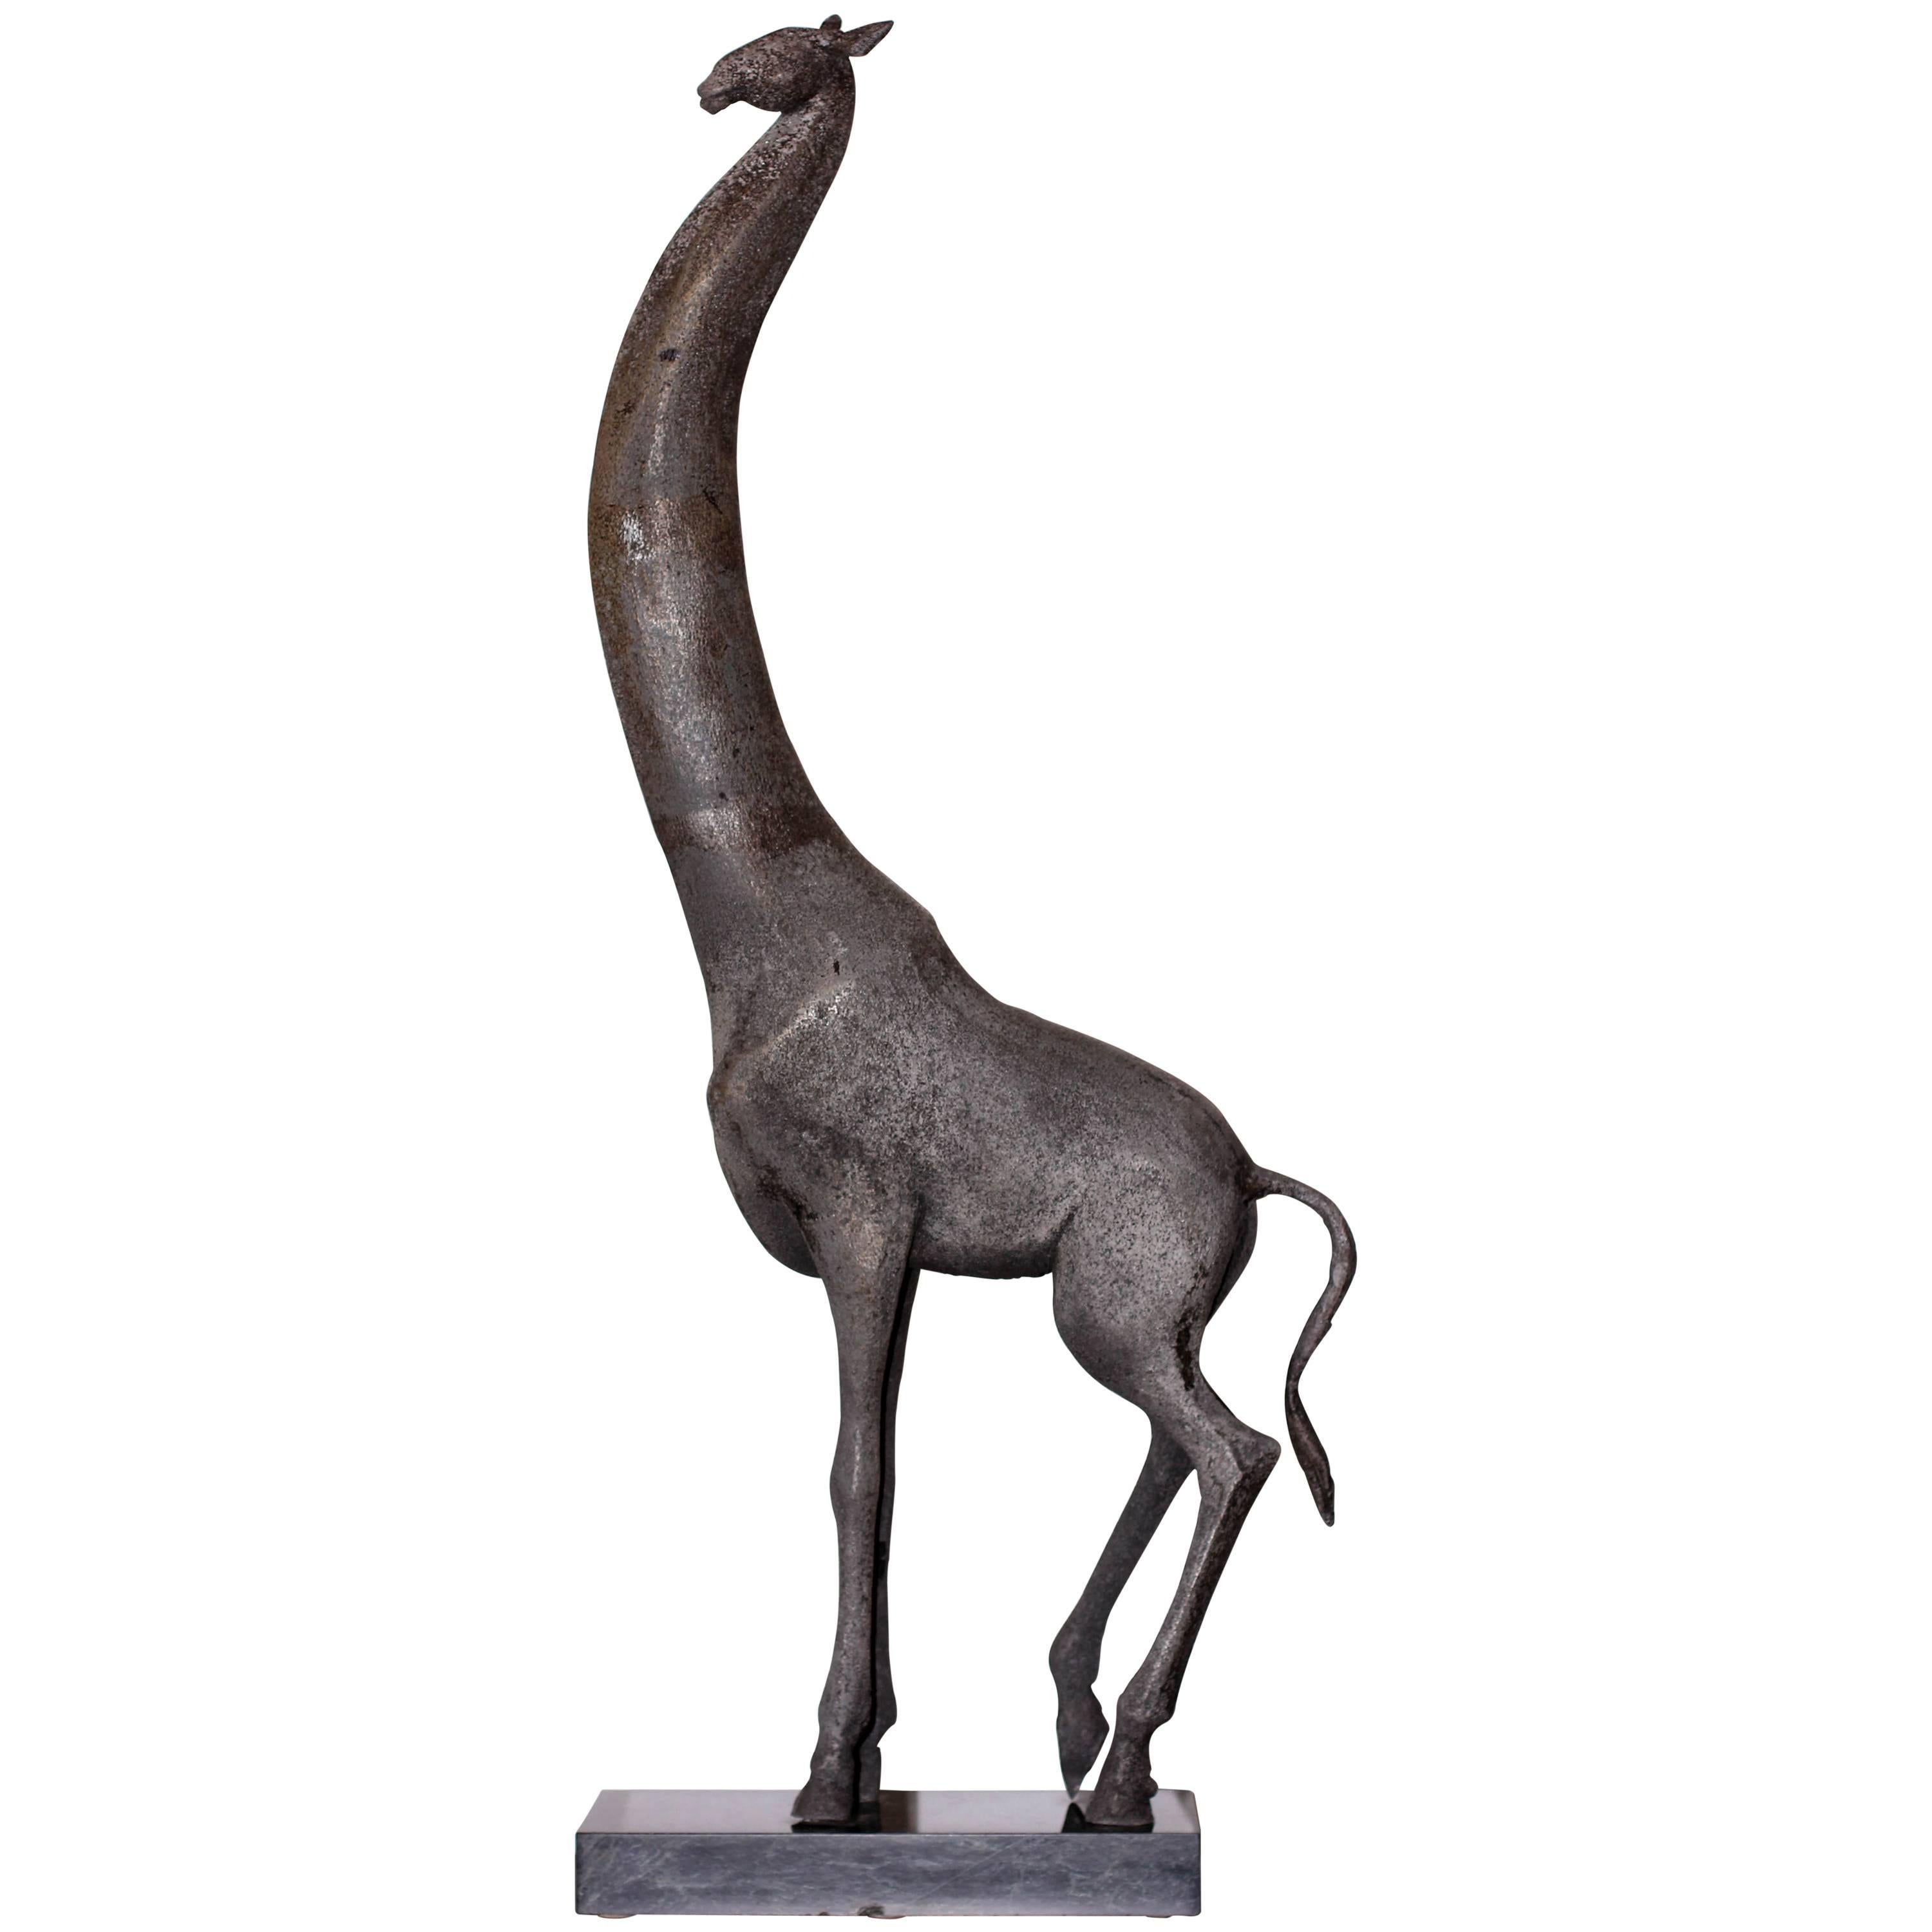 A large and early sand cast aluminum  Modernist sculpture of a giraffe by  Cuban American artist Manuel Carbonell. Pedestal included. Height is 73” with base. 
Carbonell’s   early sculptures where sand cast and unique. This is an edition of 1/1.